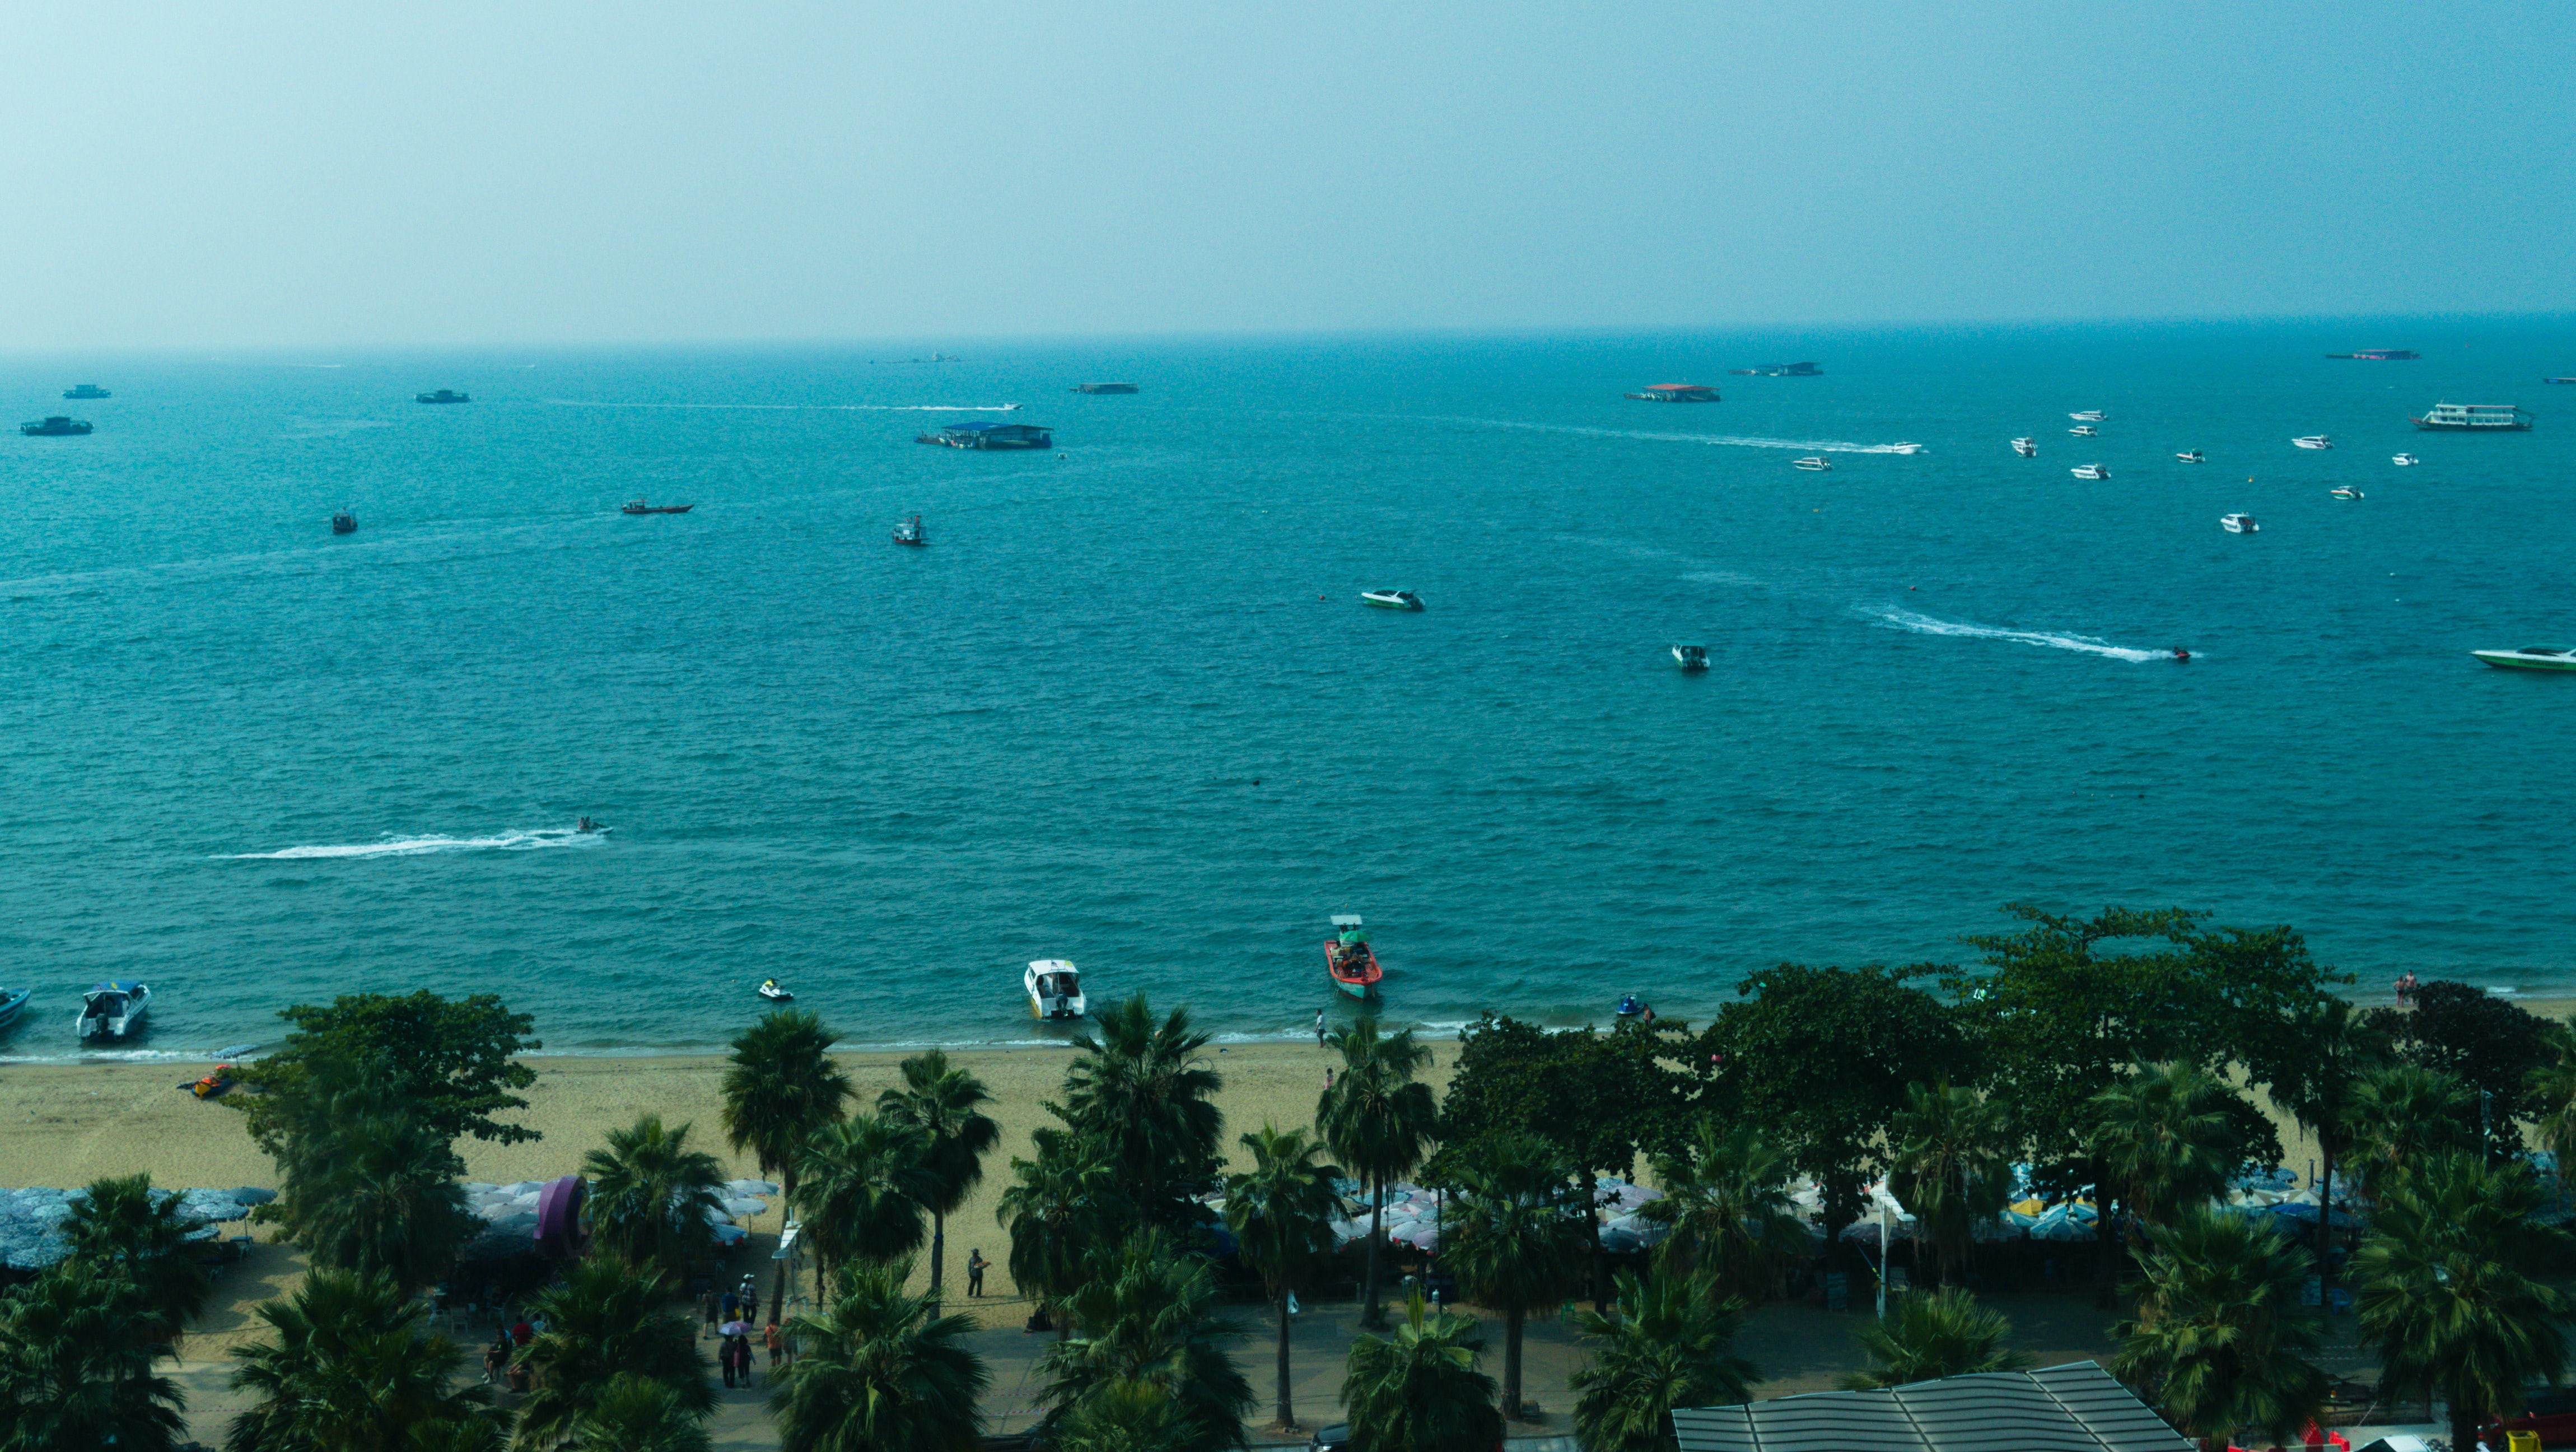 Eagle's eye view of Pattaya Beach with different sizes of ships and boats on the water